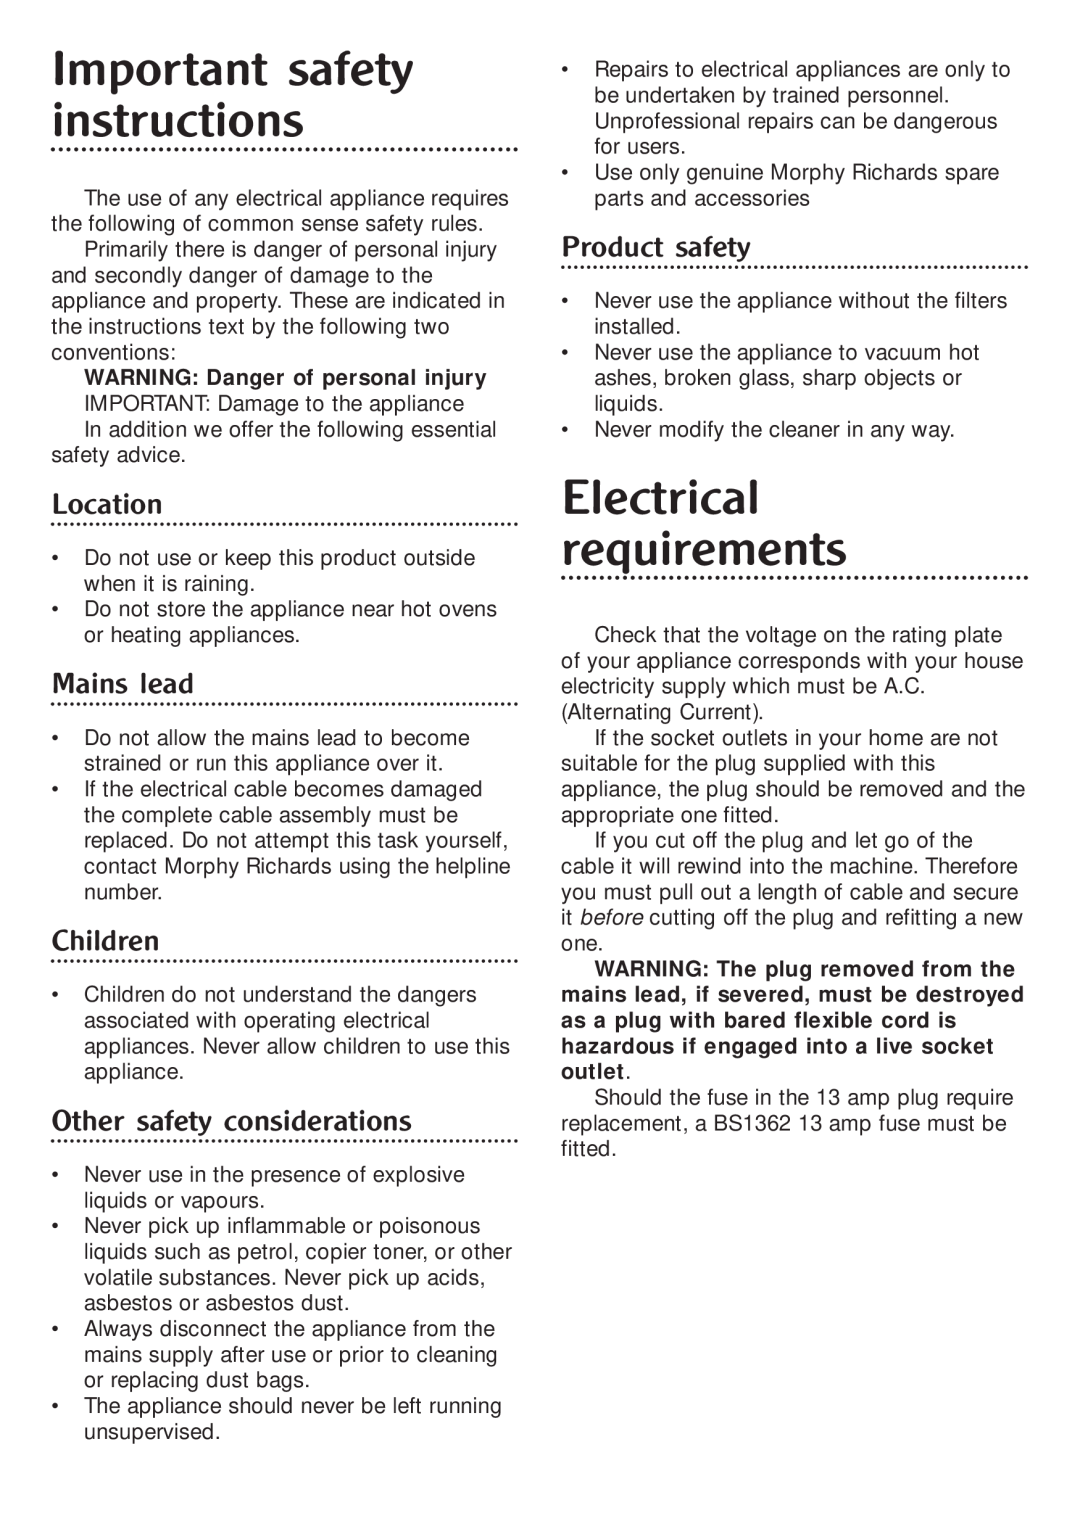 Morphy Richards Orb vacuum cleaner Important safety instructions, Electrical requirements, Location, Mains lead, Children 